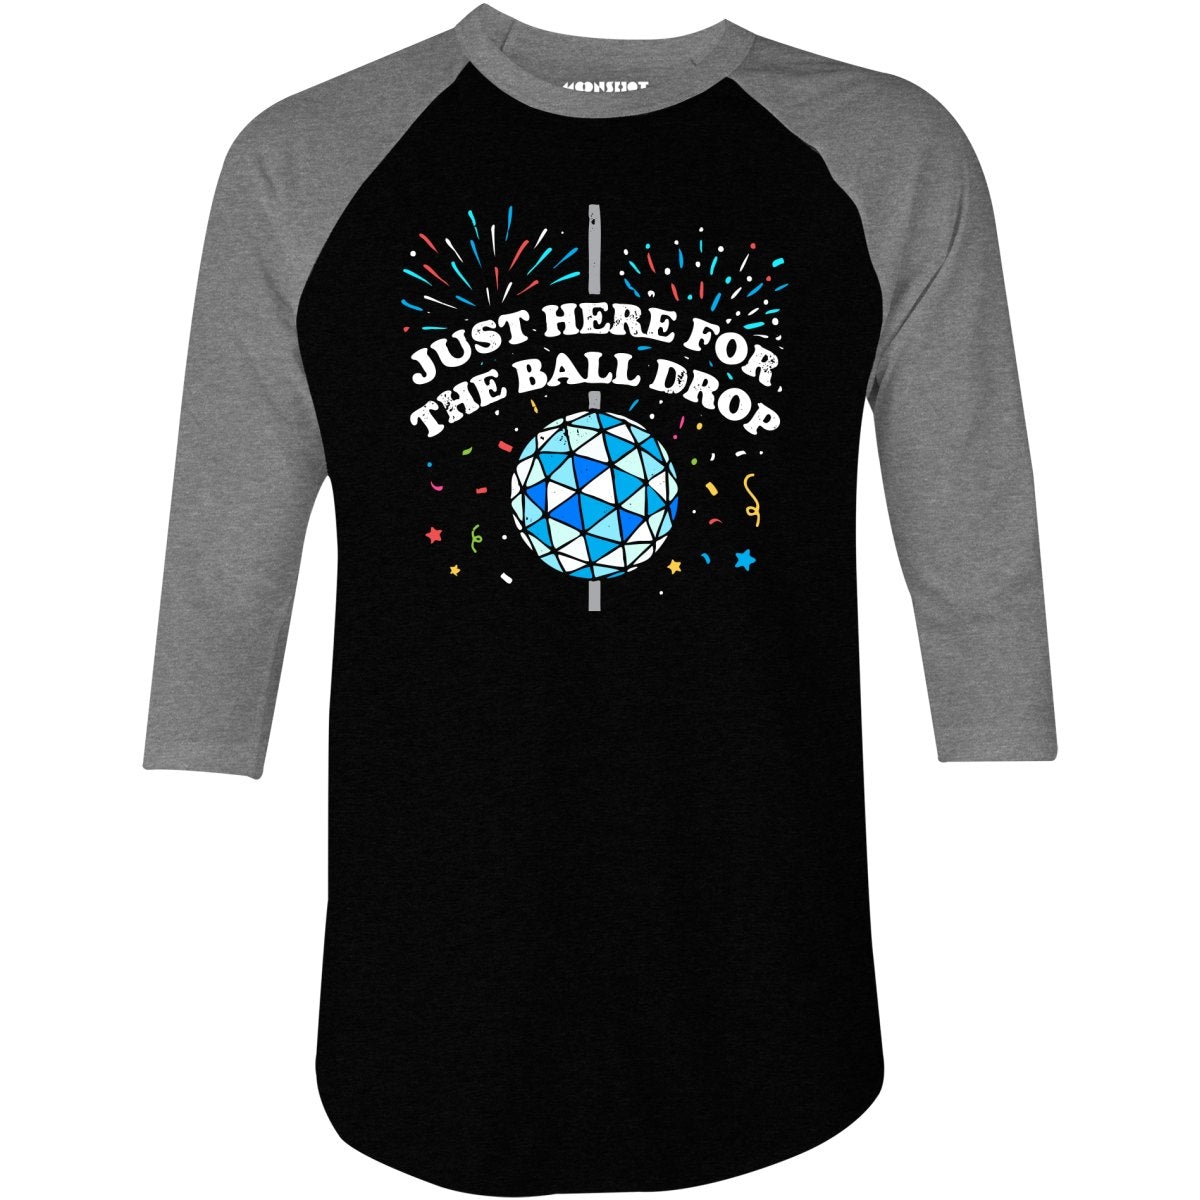 Just Here for The Ball Drop - 3/4 Sleeve Raglan T-Shirt